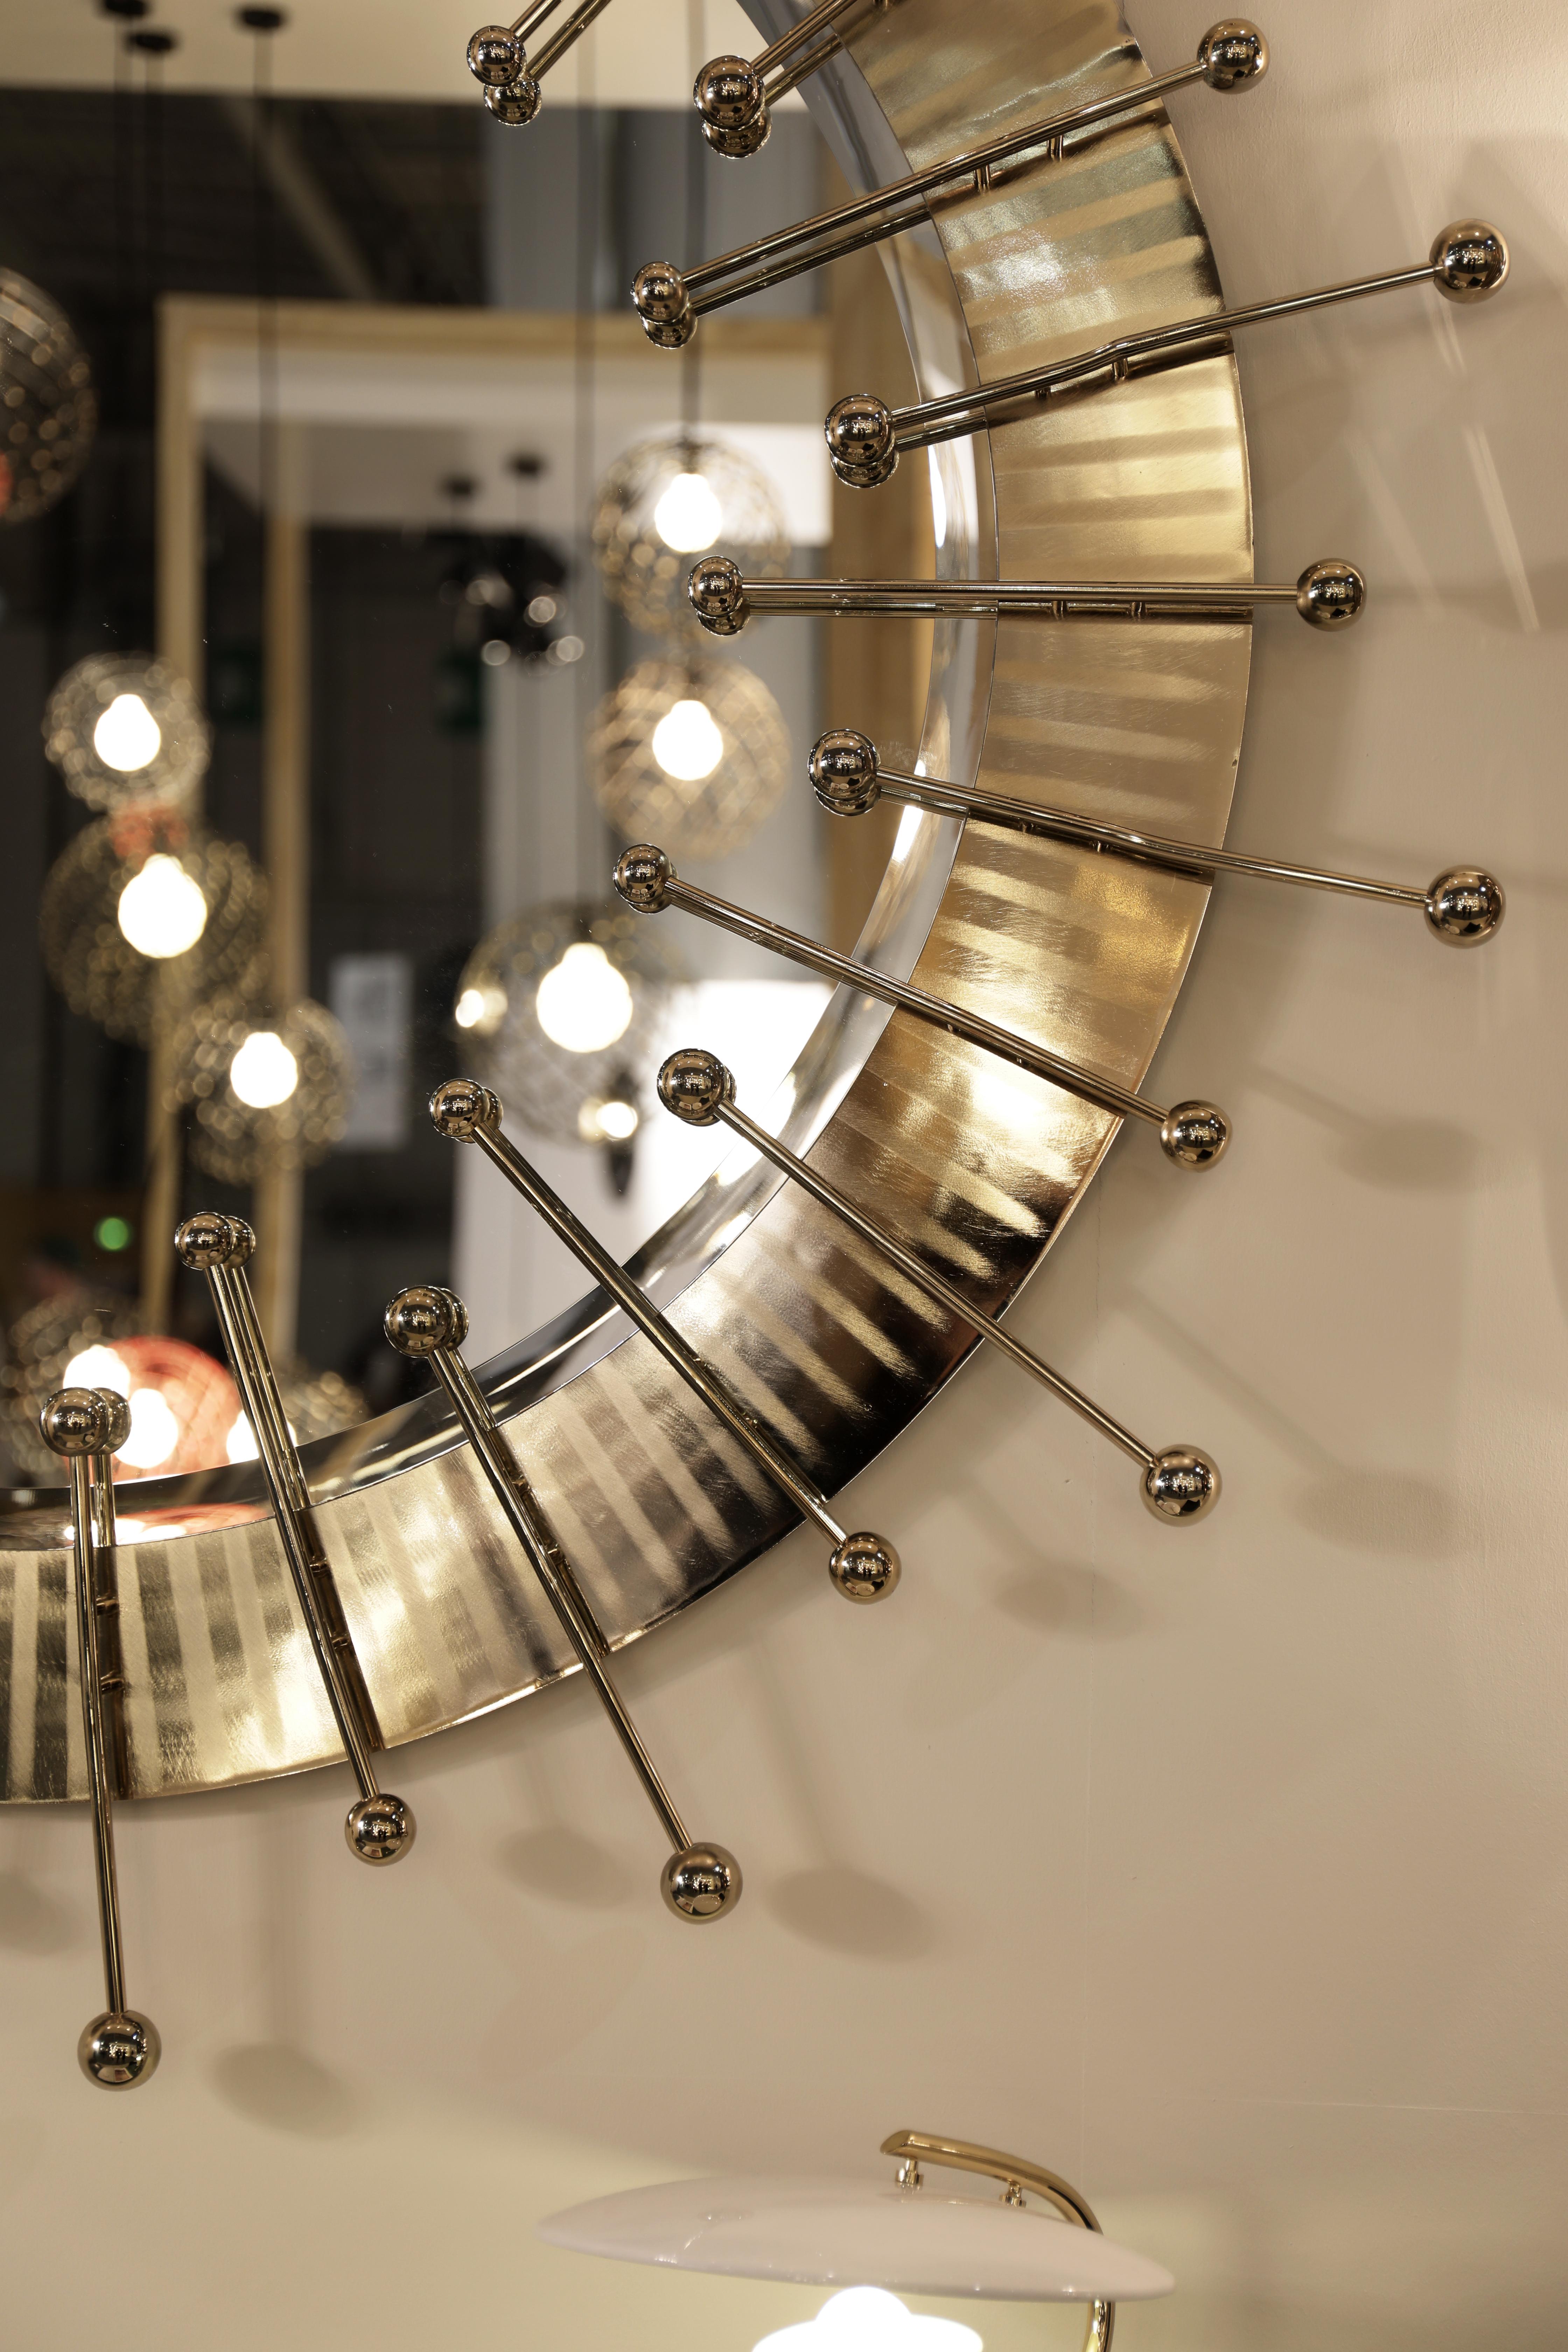 A contemporary descendant of mid-century modern style, the Quantum Mirror is not just a spot-on reflection of the atomic age design, it is a leap forward. A set of gold plated spheres arranged in a circular pattern create a stunning visual effect.